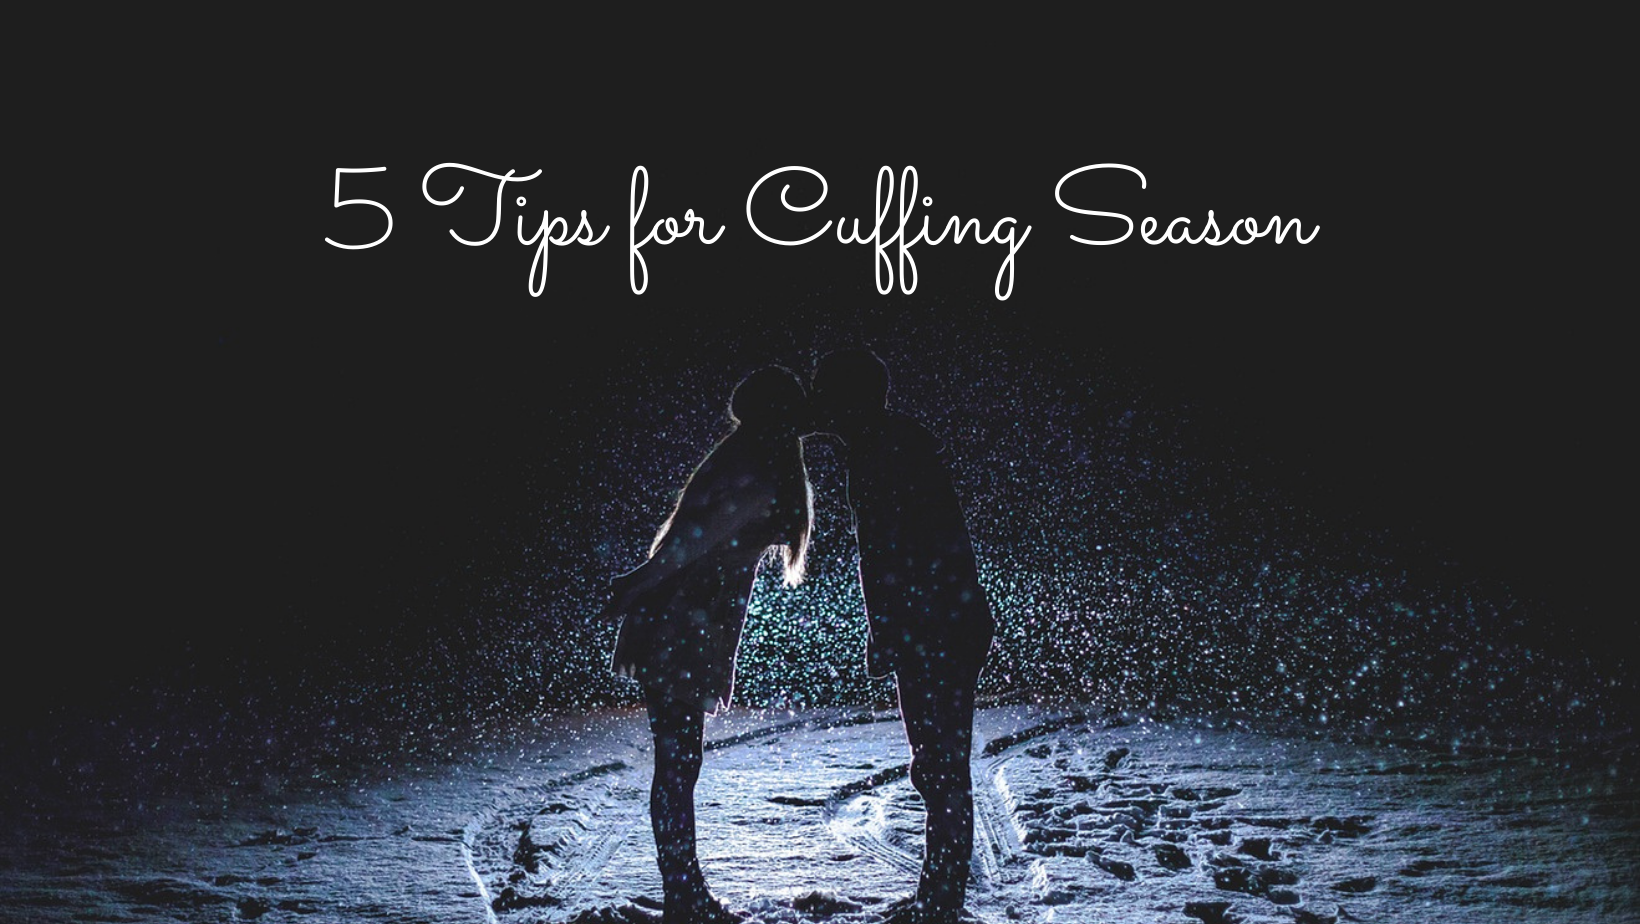 How to get through winter dating cuffing season?